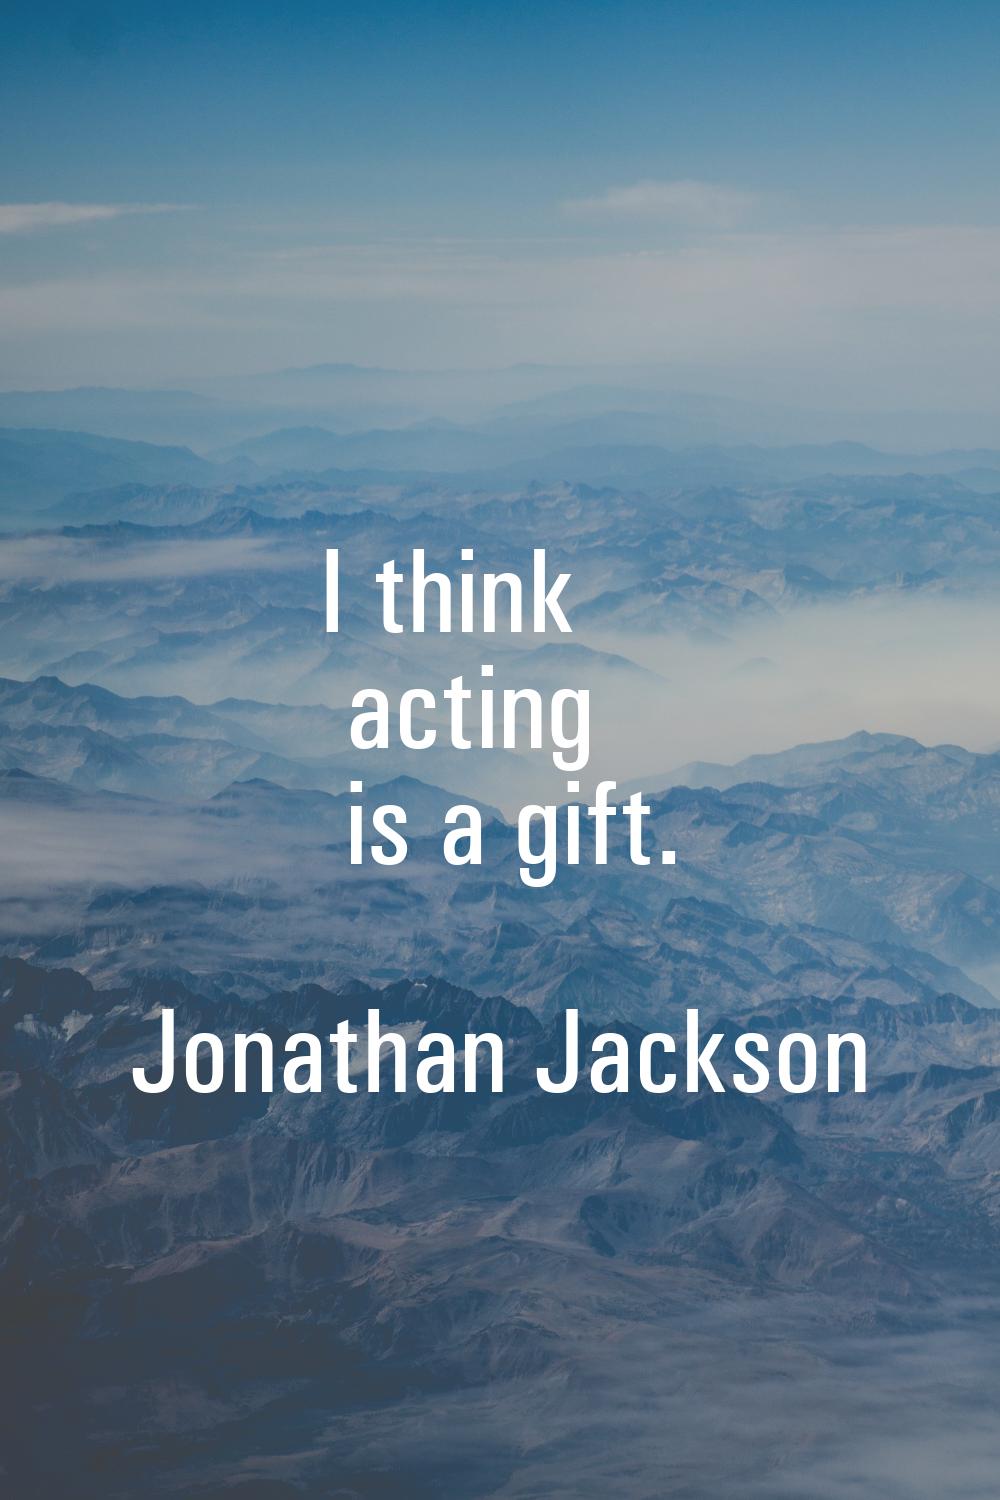 I think acting is a gift.